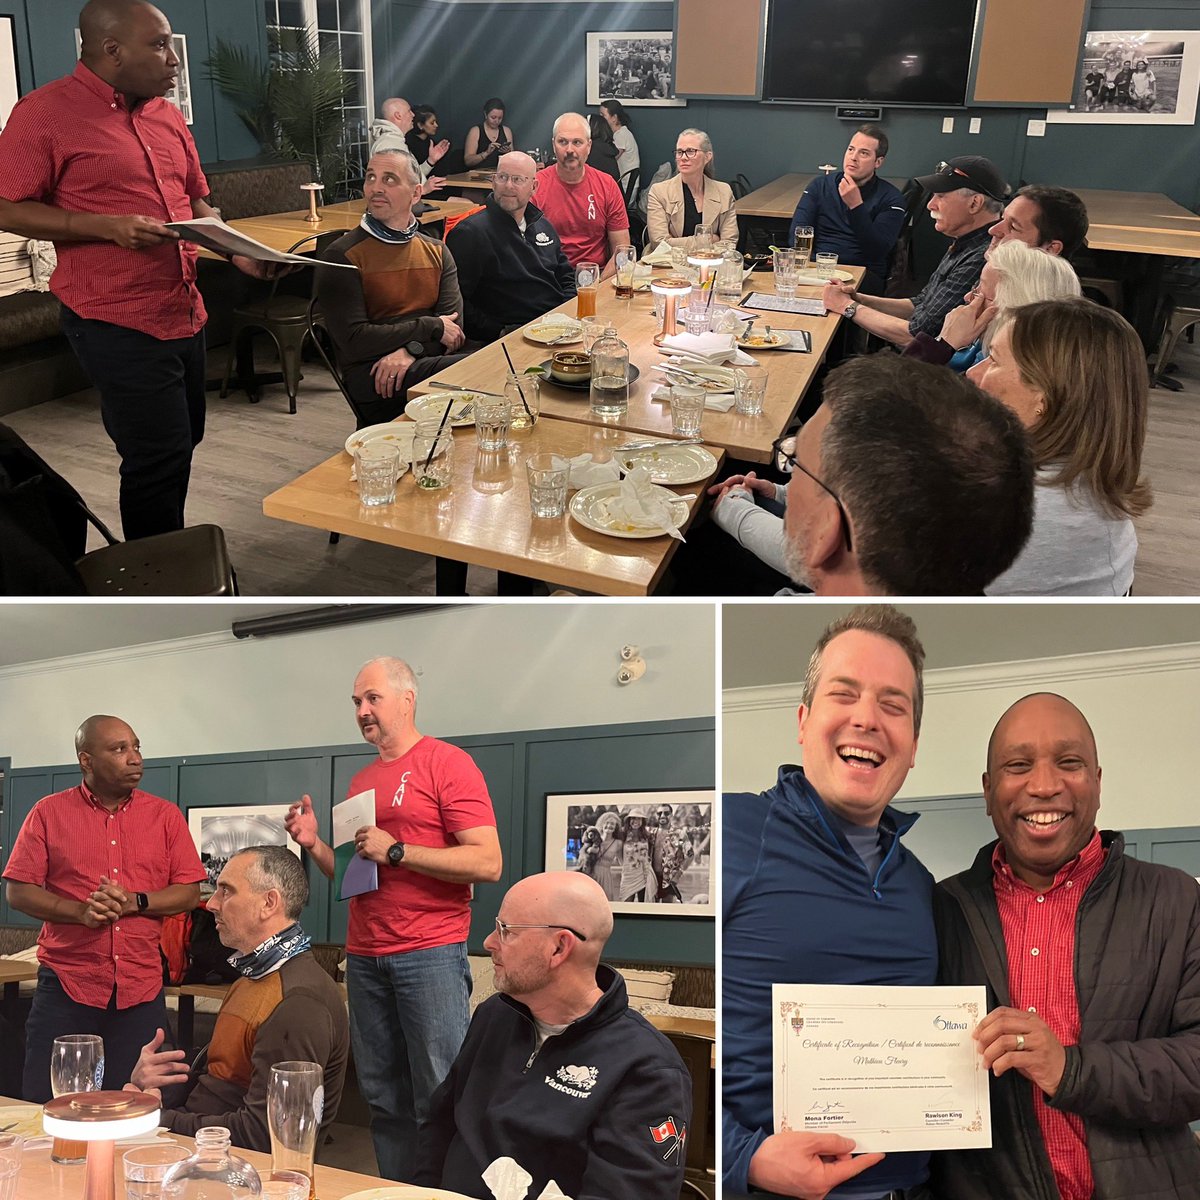 A gathering of some of our awesome volunteers tonight. 🙏 to @rawlsonking and @MonaFortier for providing certificates of recognition - we appreciate your support of our community trail. Happy spring and summer, everyone. See you in the fall when we start prepping the trail!